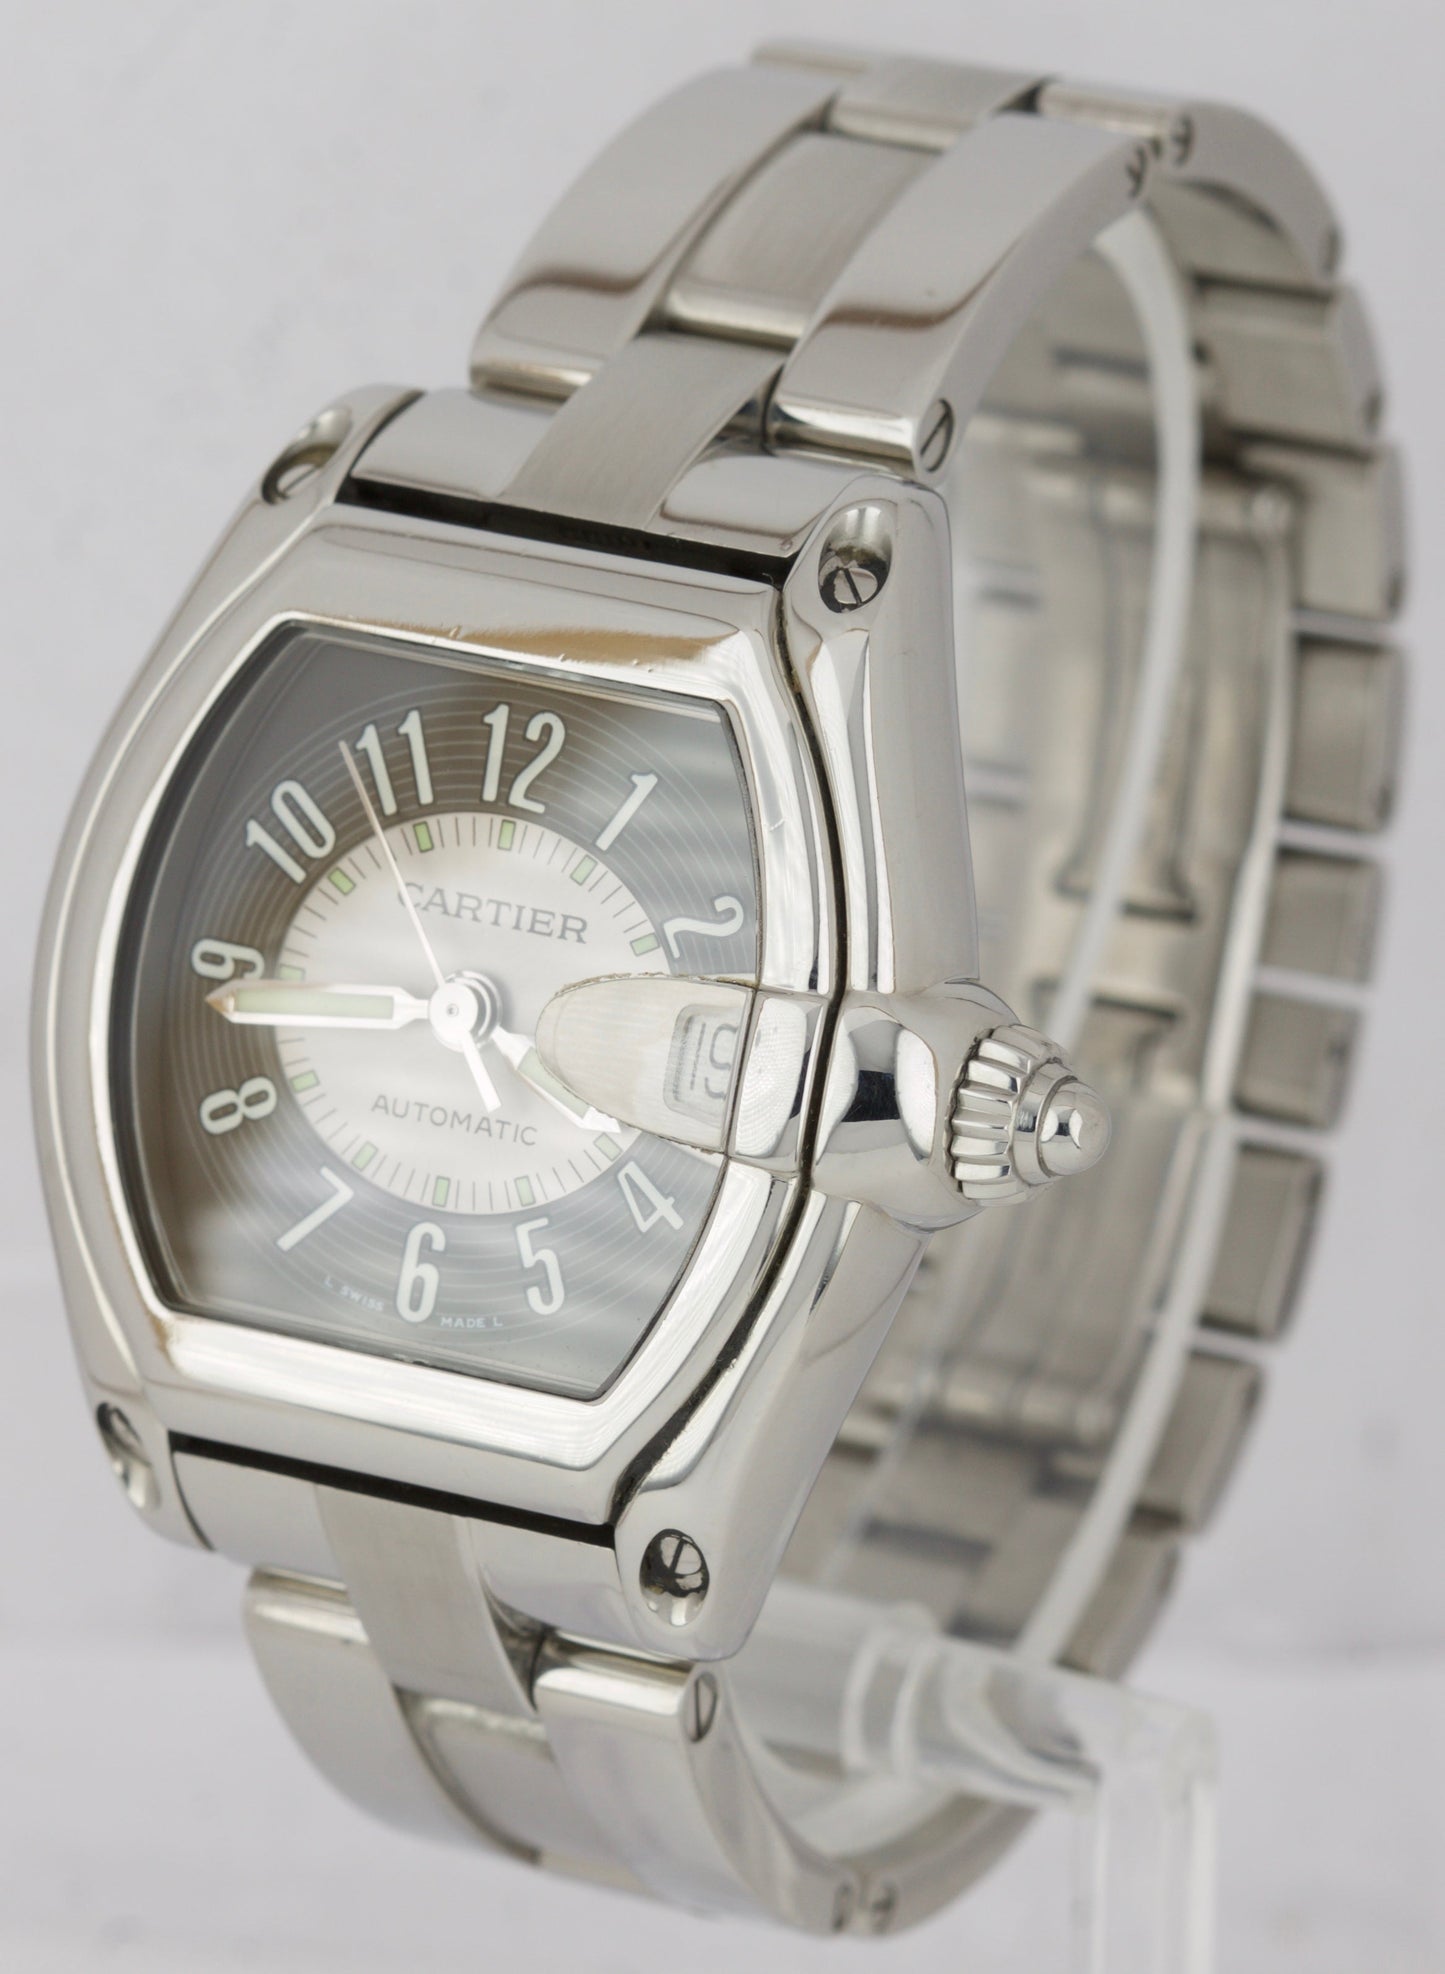 Cartier Roadster Automatic Silver Grey 36mm W62001V3 Stainless Steel Watch 2510